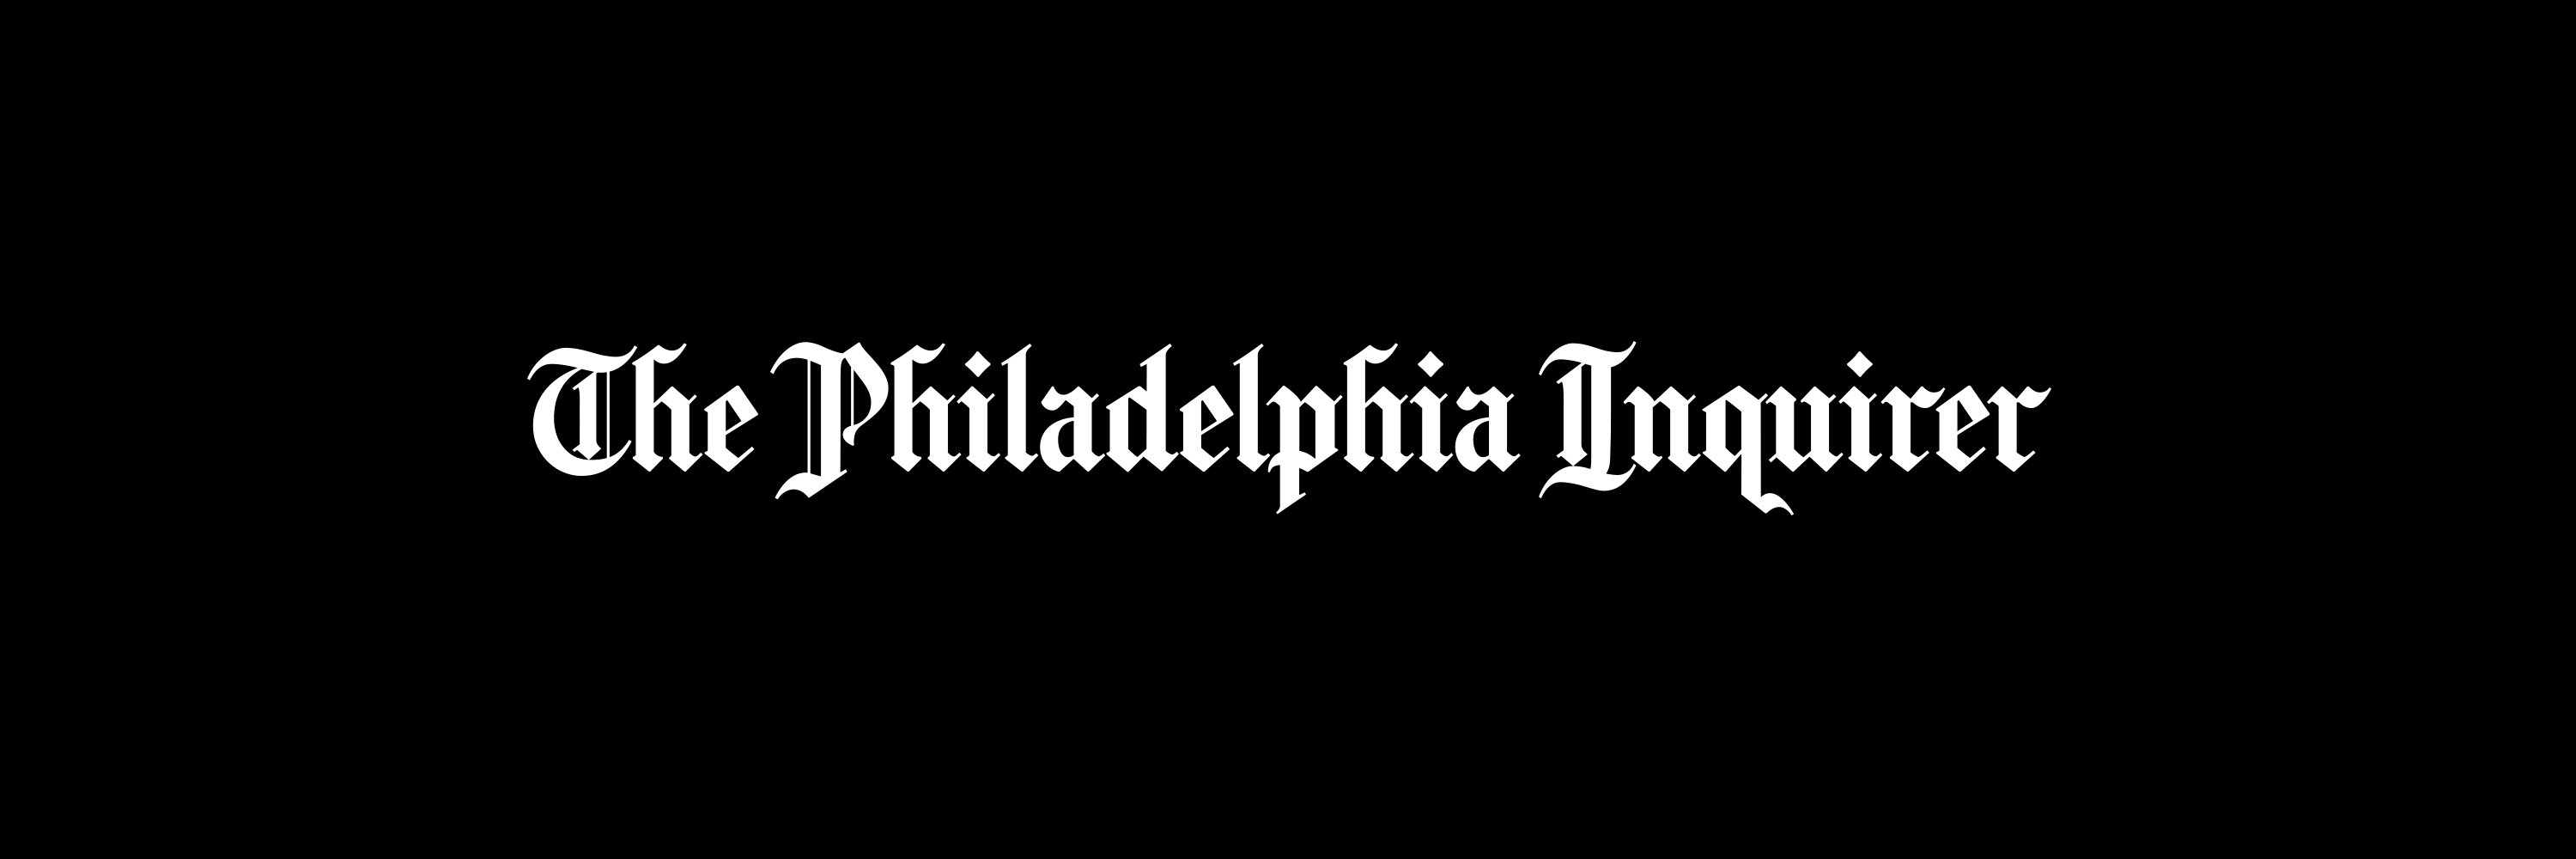 The Philadelphia Inquirer on Twitter: "2/ We also redesigned ...